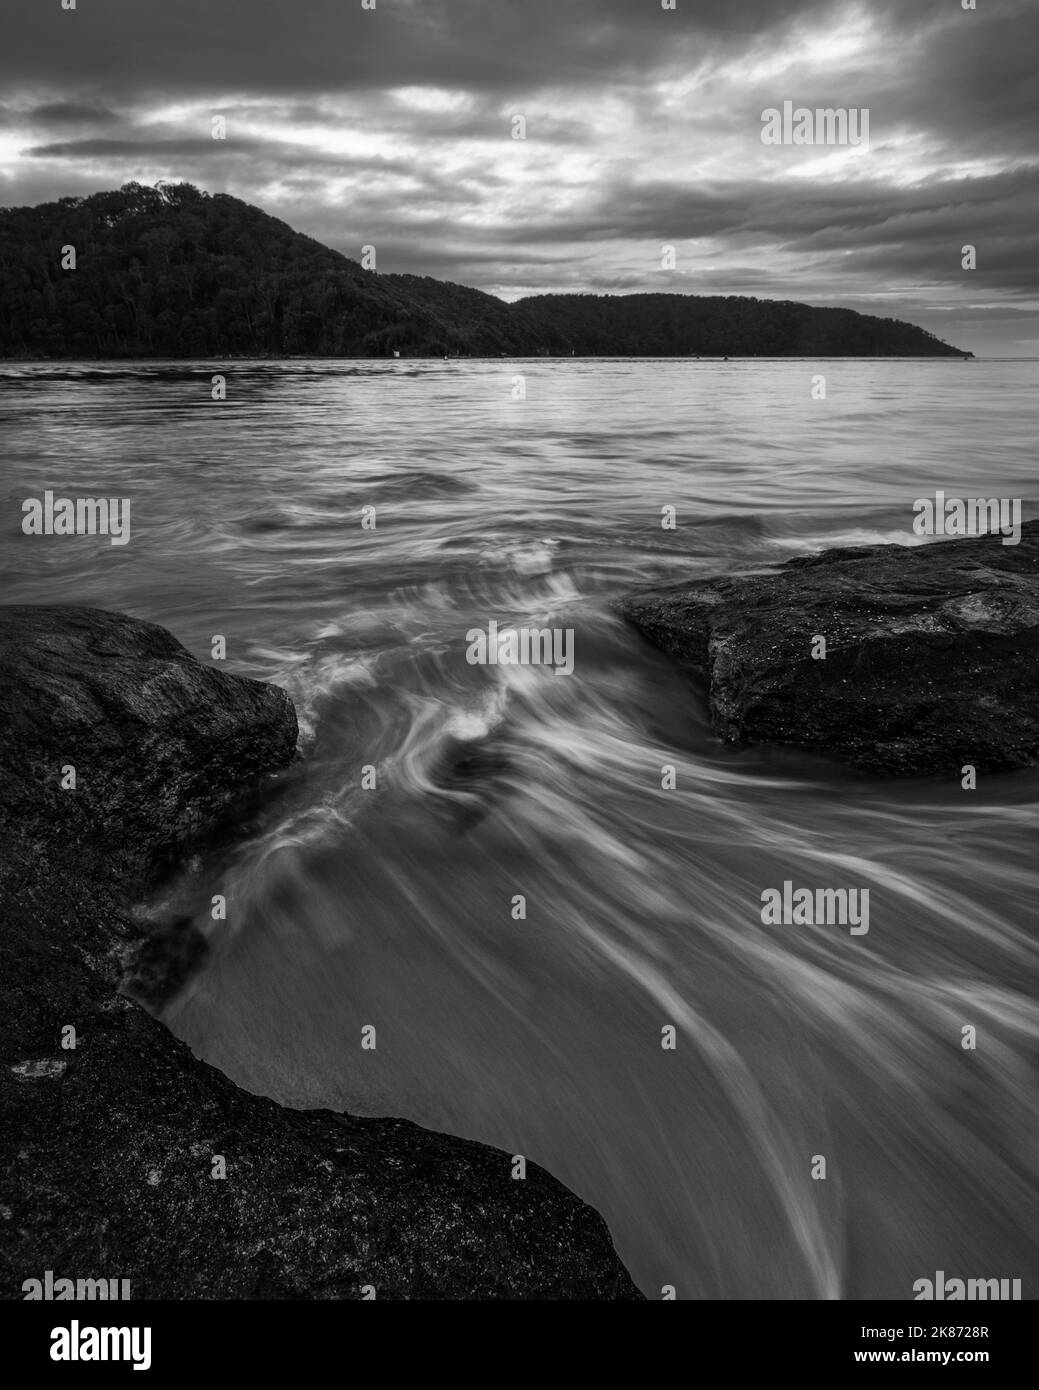 A grayscale shot of water flowing through rocks at Ettalong Beach in NSW, Australia Stock Photo